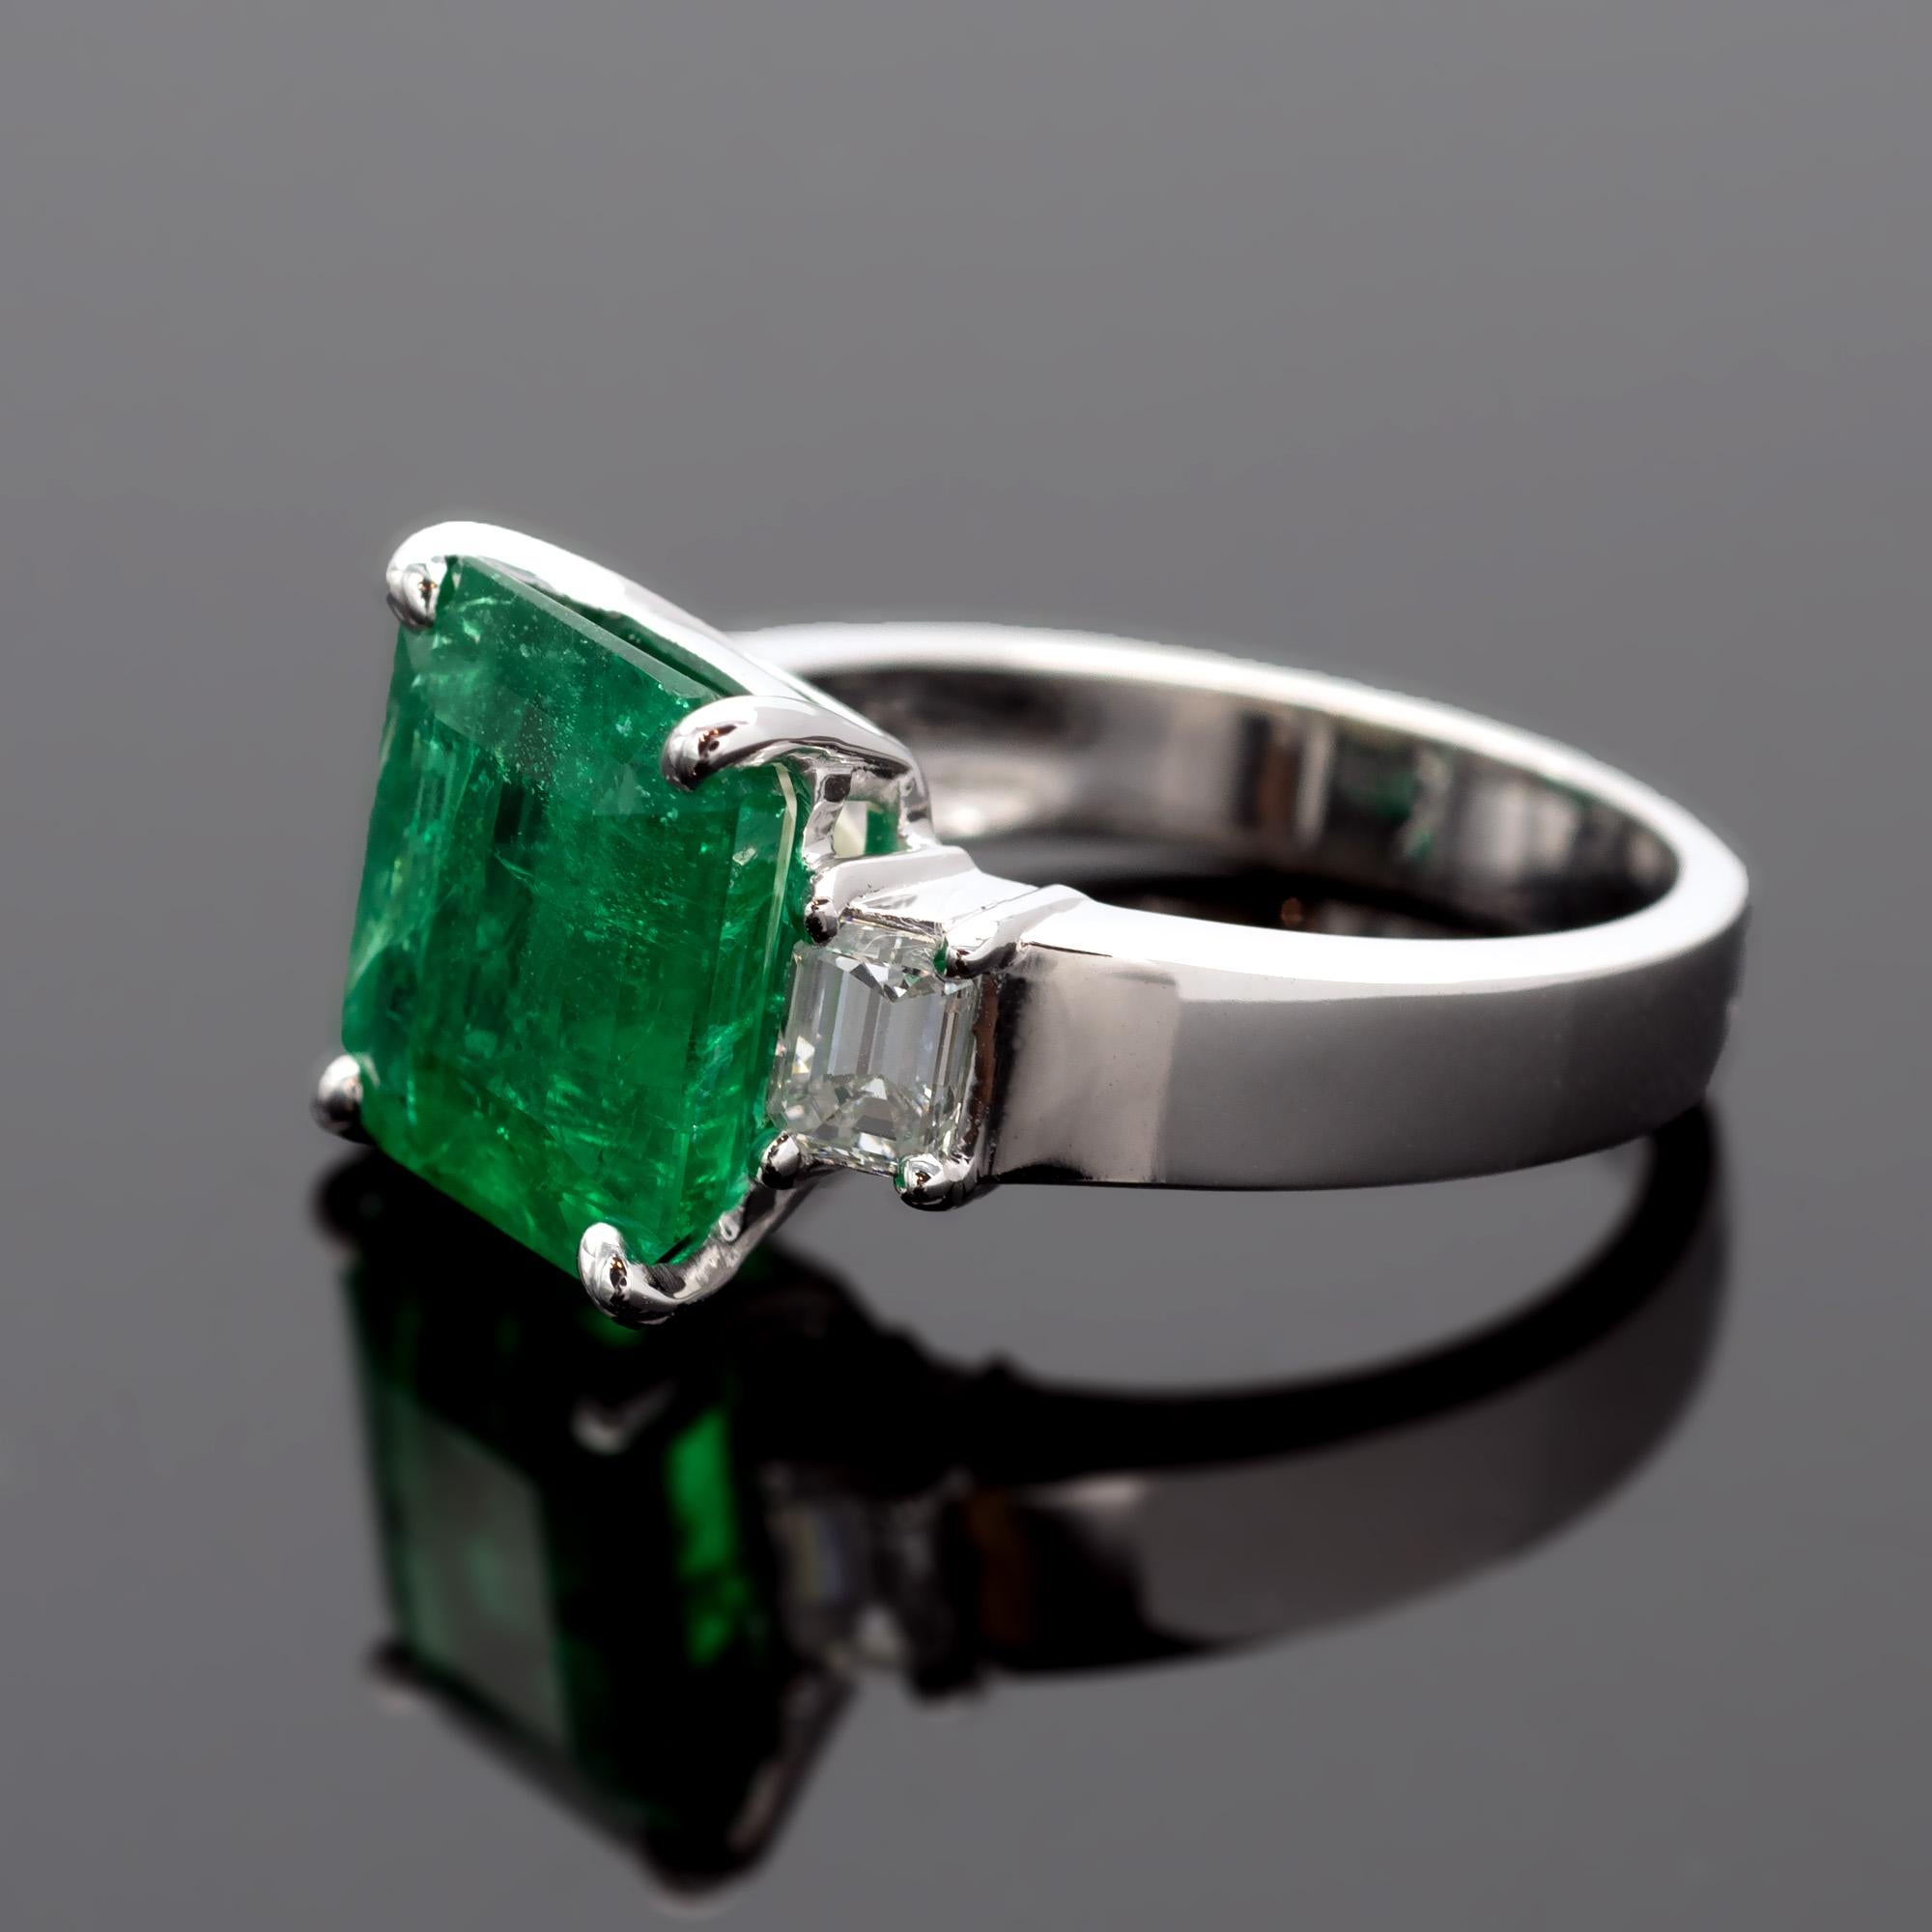 Vibrant coloured nearly 5 carat Colombian emerald set with two emerald cut diamonds weighing 0.58 carats  ( FG VS1 )
The ring itself is a very well made 18 Karat white gold engagement ring, modern yet timeless. 
The emerald comes with a gem report